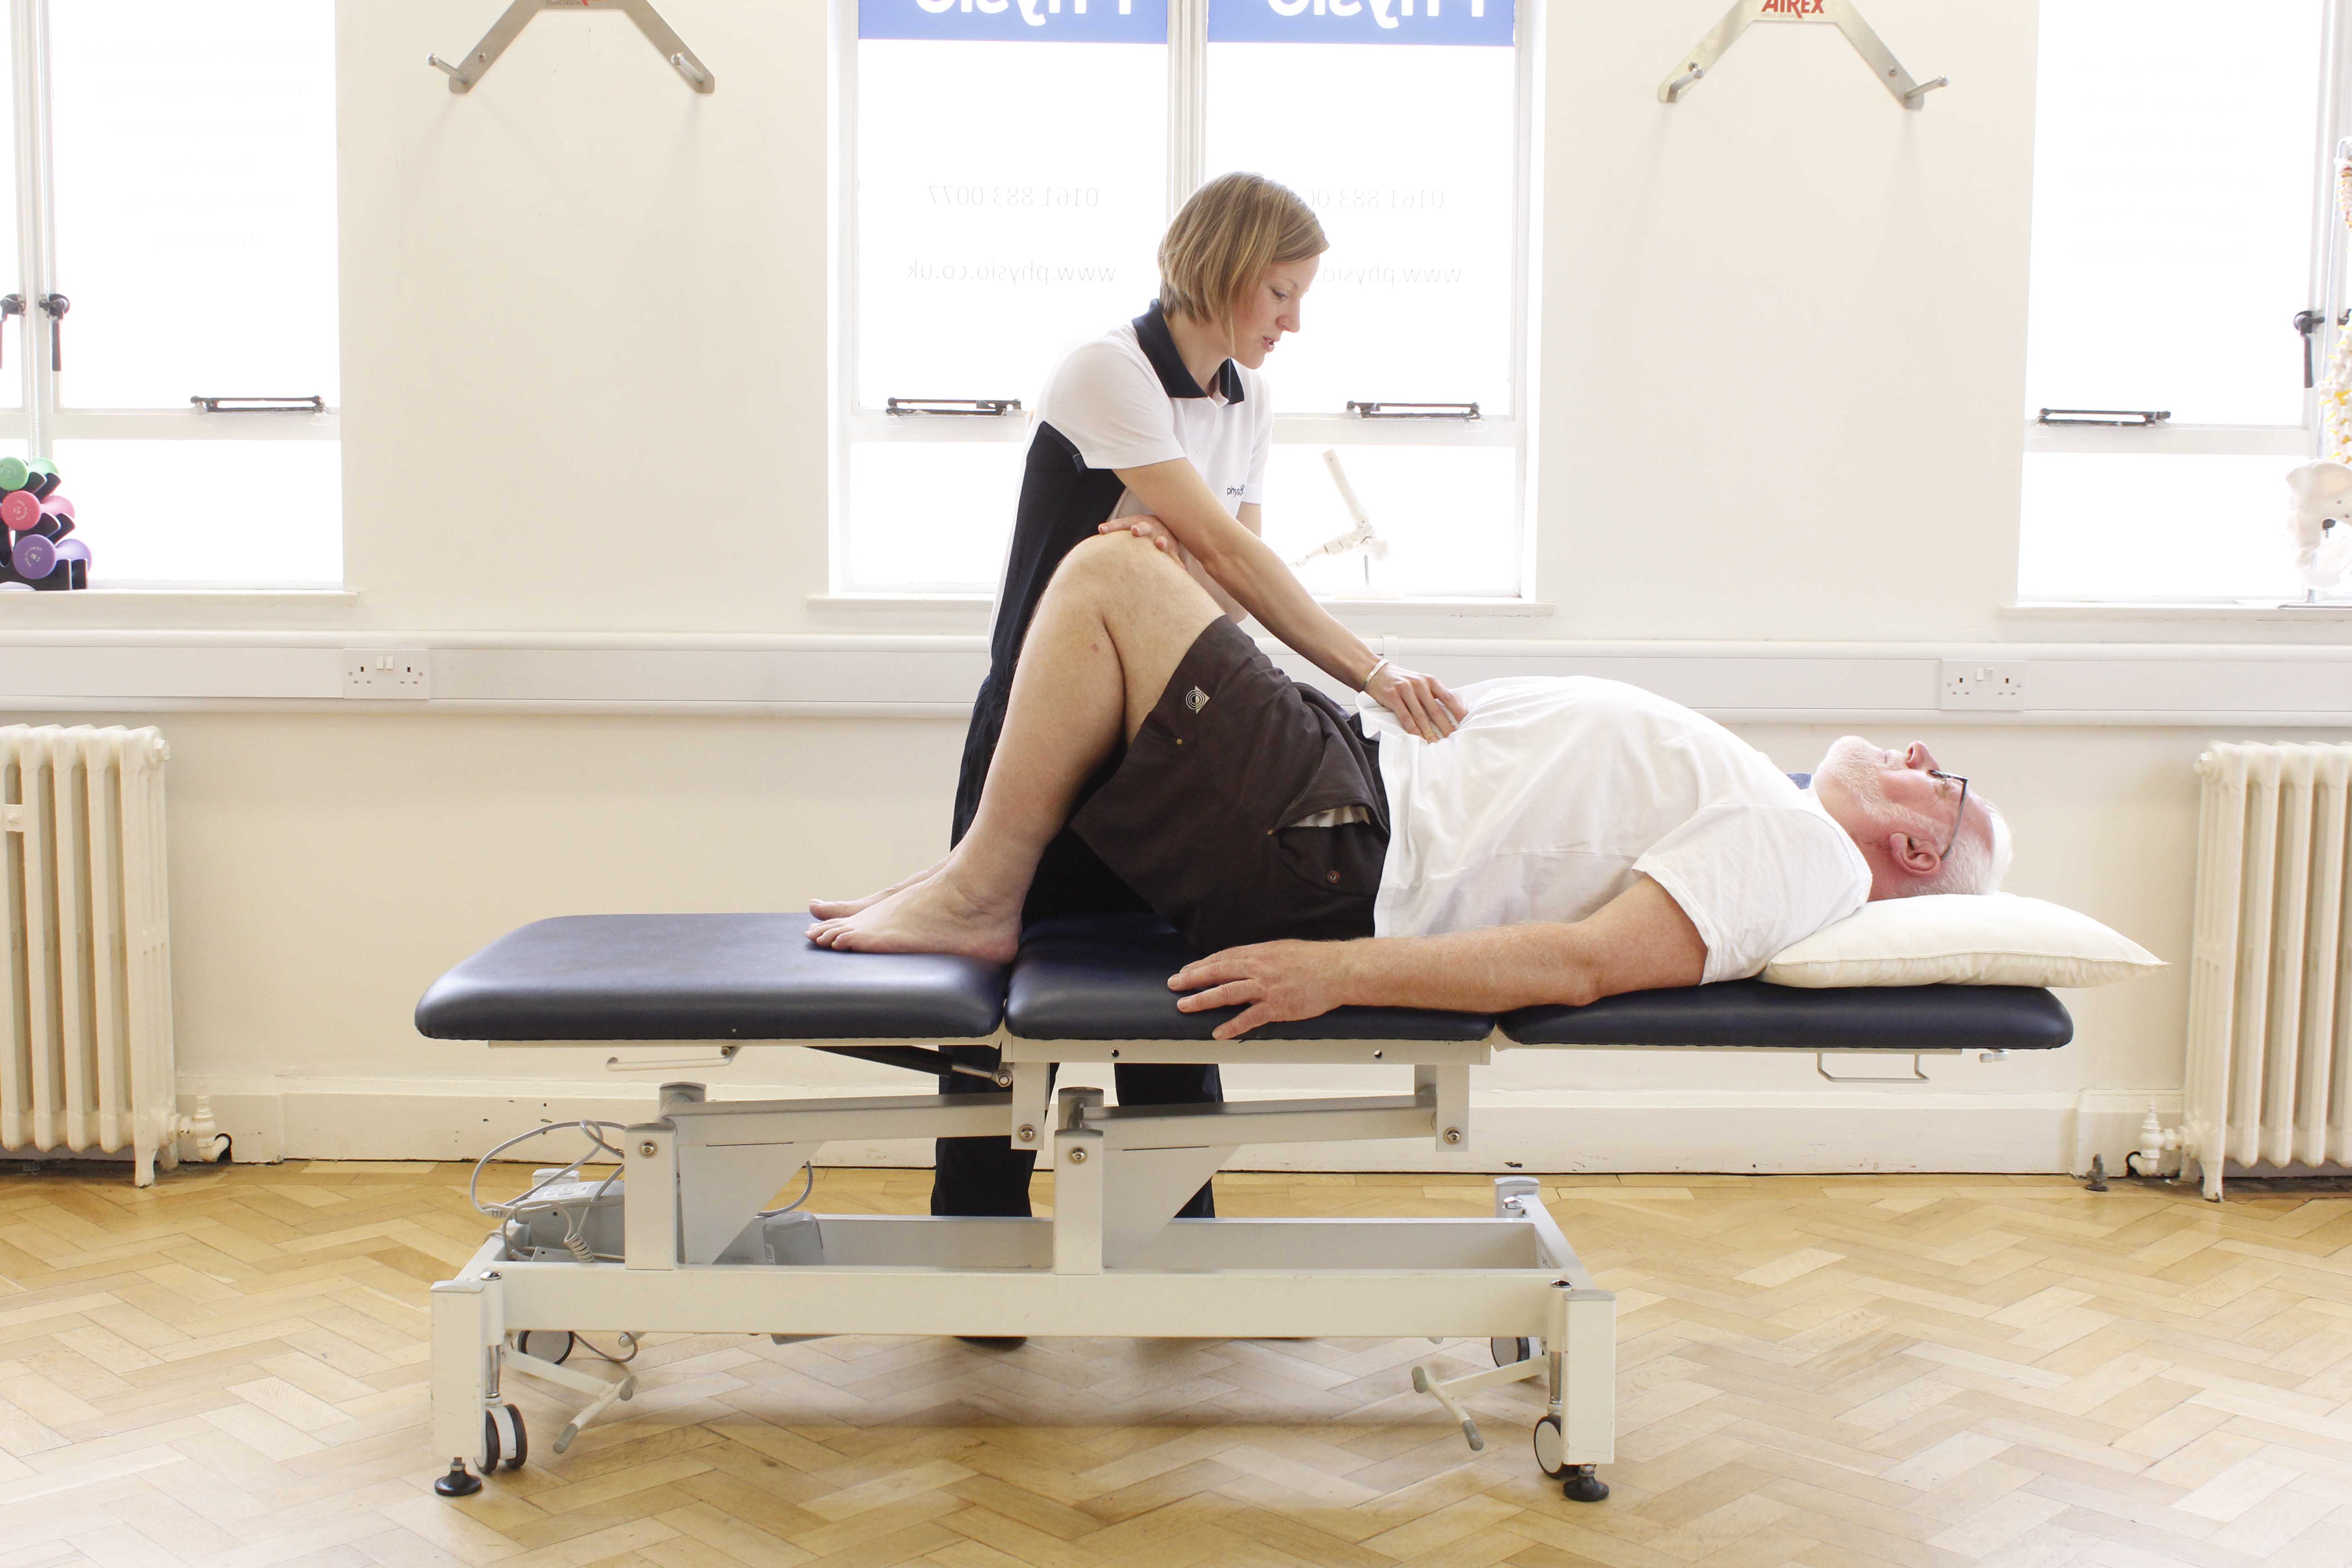 Improving abdominal and pelvic muscle control with assistance from a specialist physiotherapist